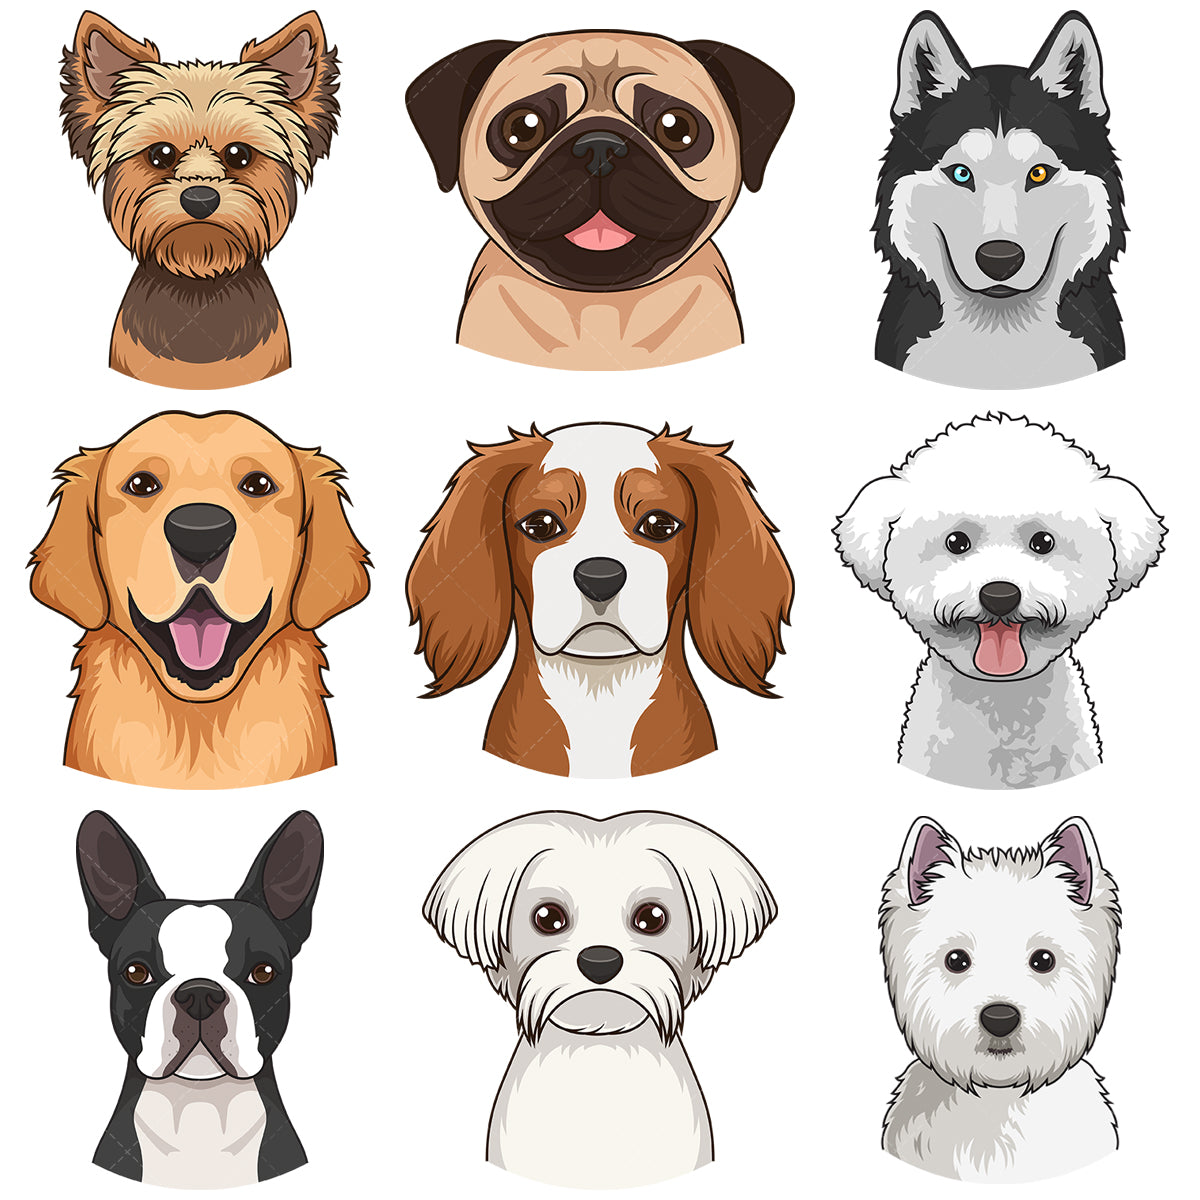 A bundle of 9 royalty-free stock vector illustrations of dog faces.